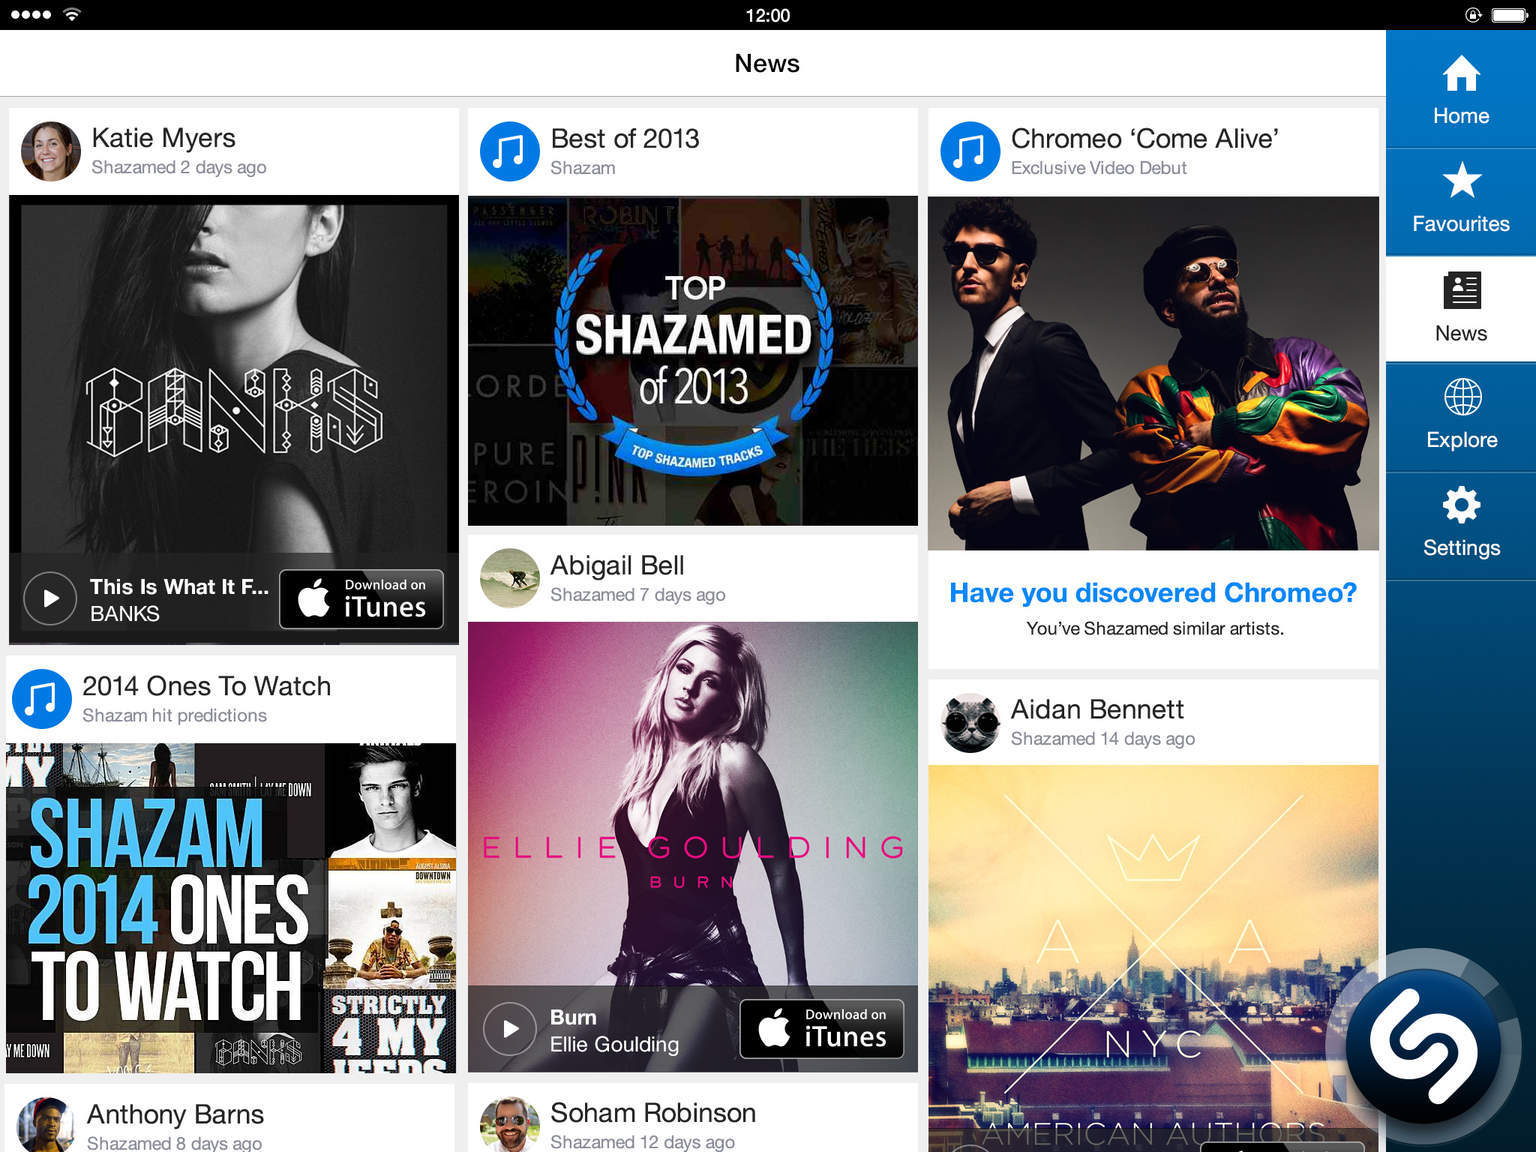 Shazam App Gets Camera Support, Lets You Shazam Images With QR Codes